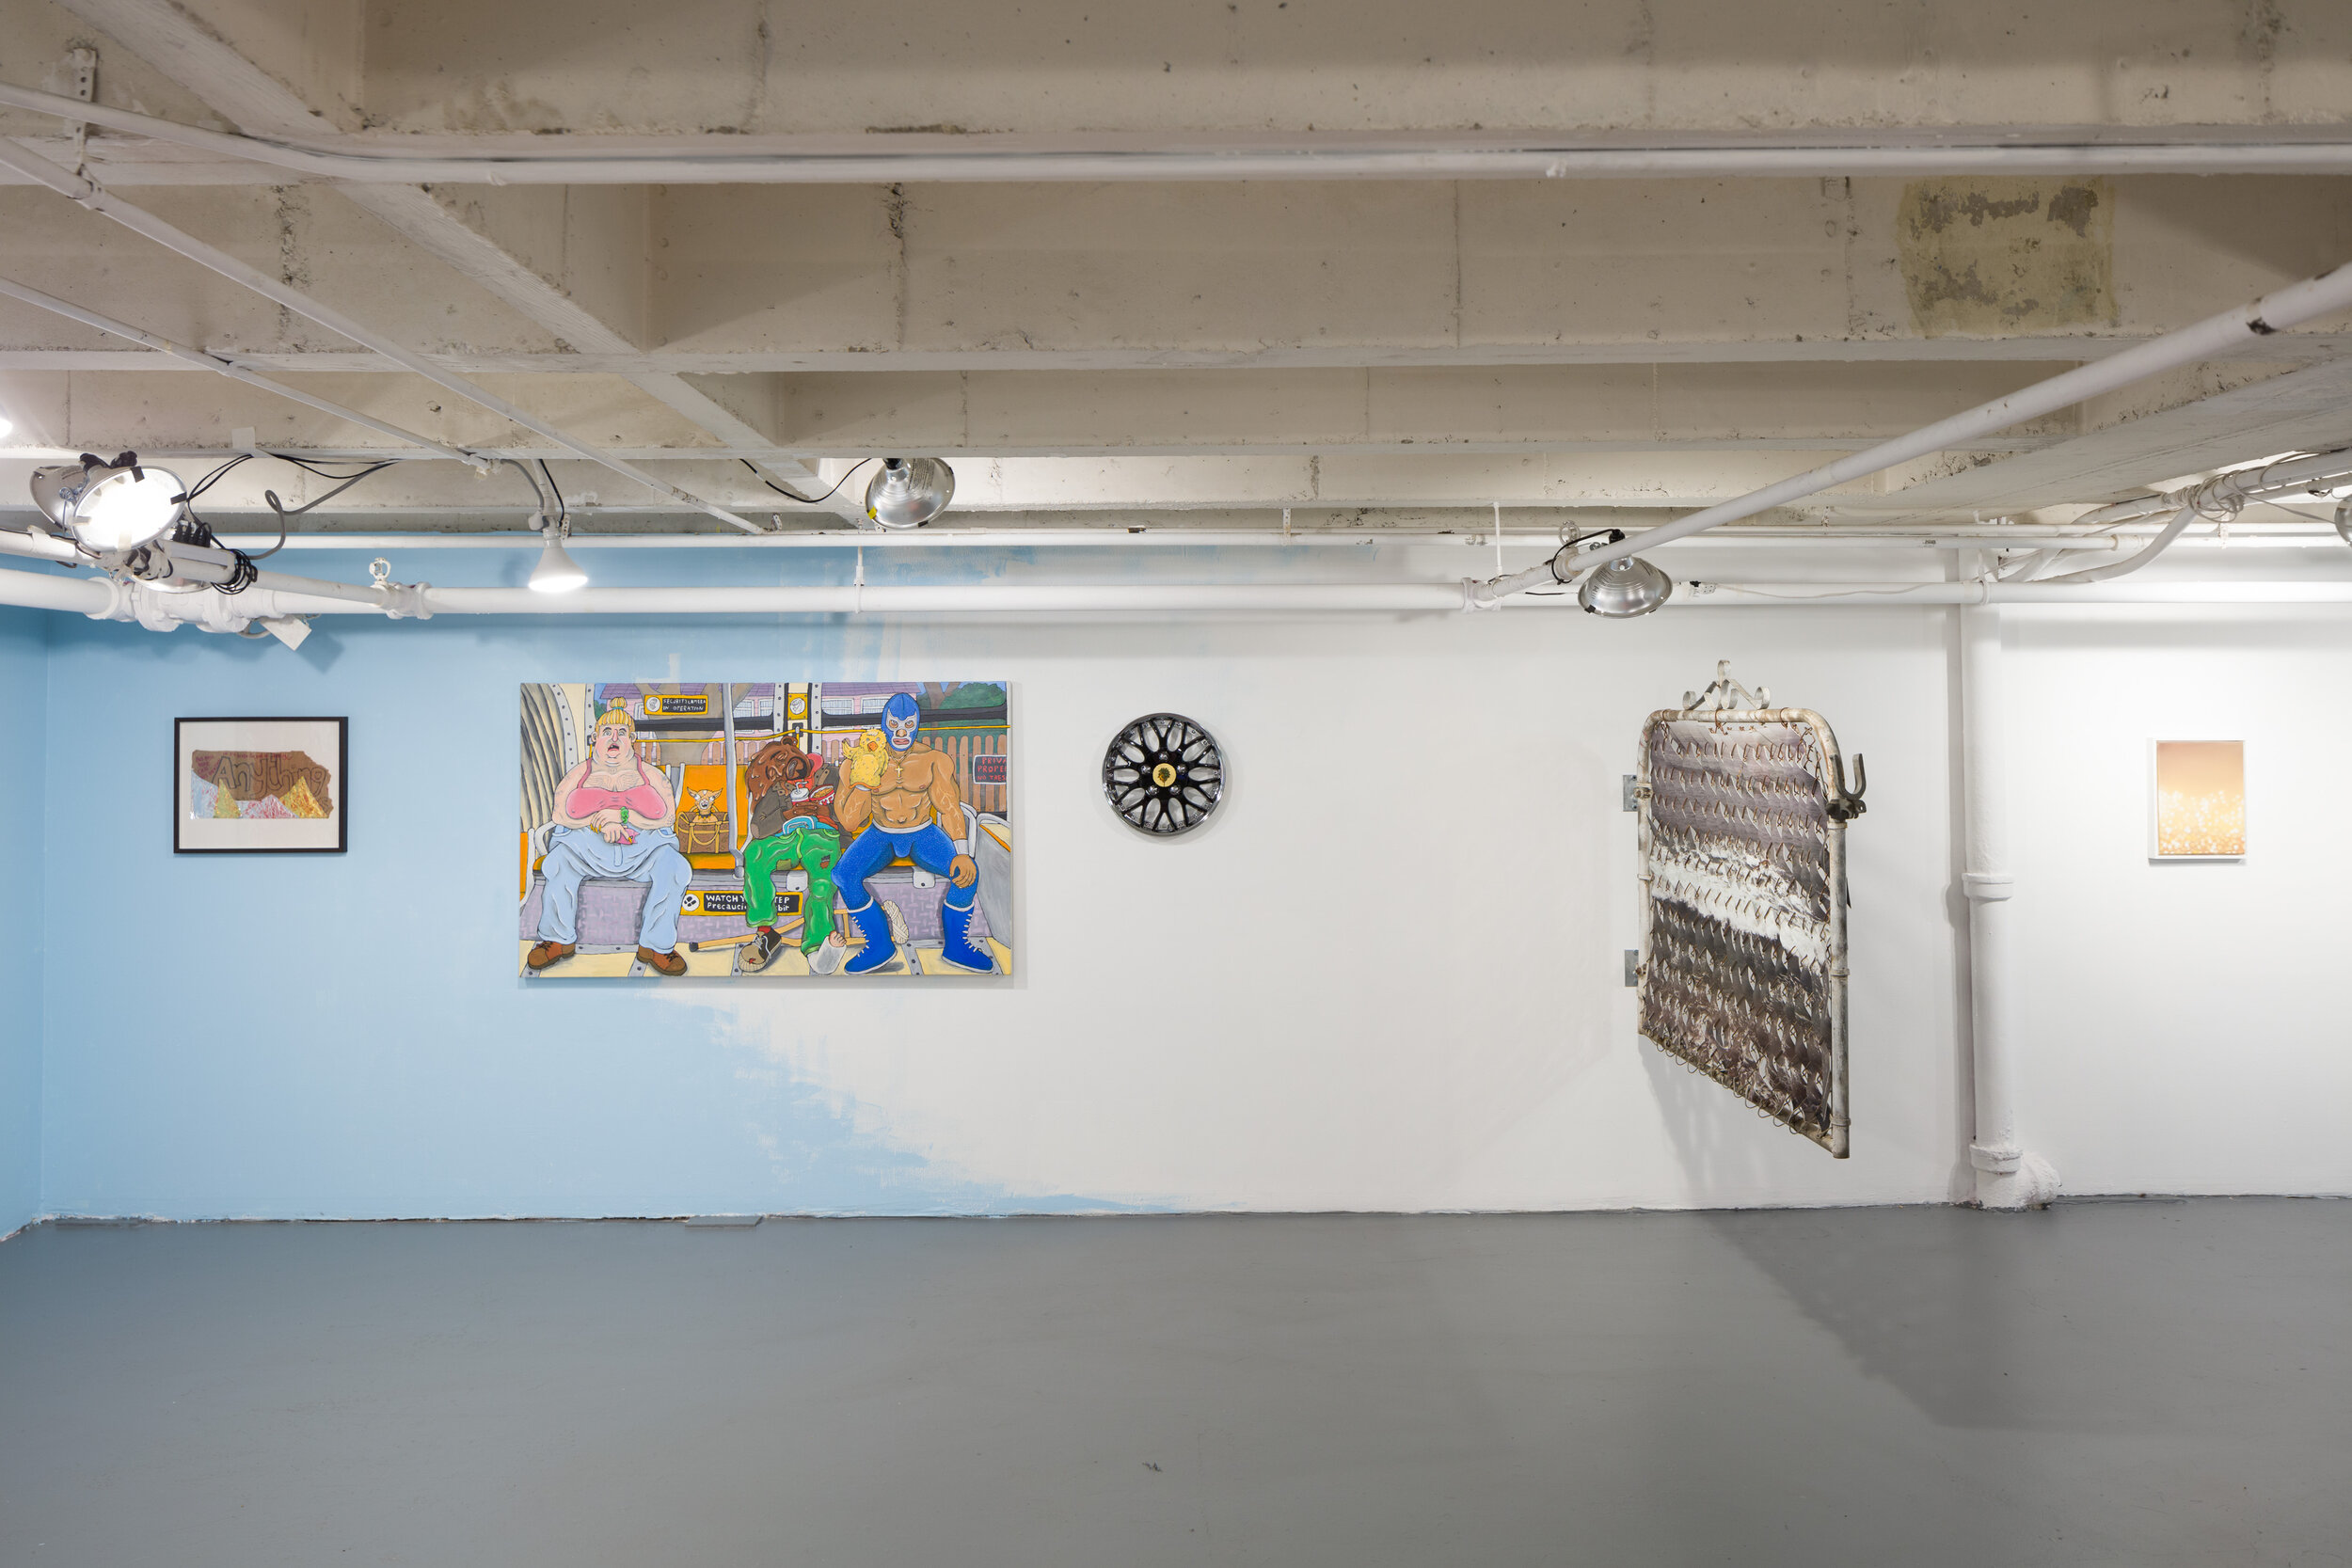   Dreamin' of a... , Curated by Sagi Refael, Installation at CJG, July 2019 